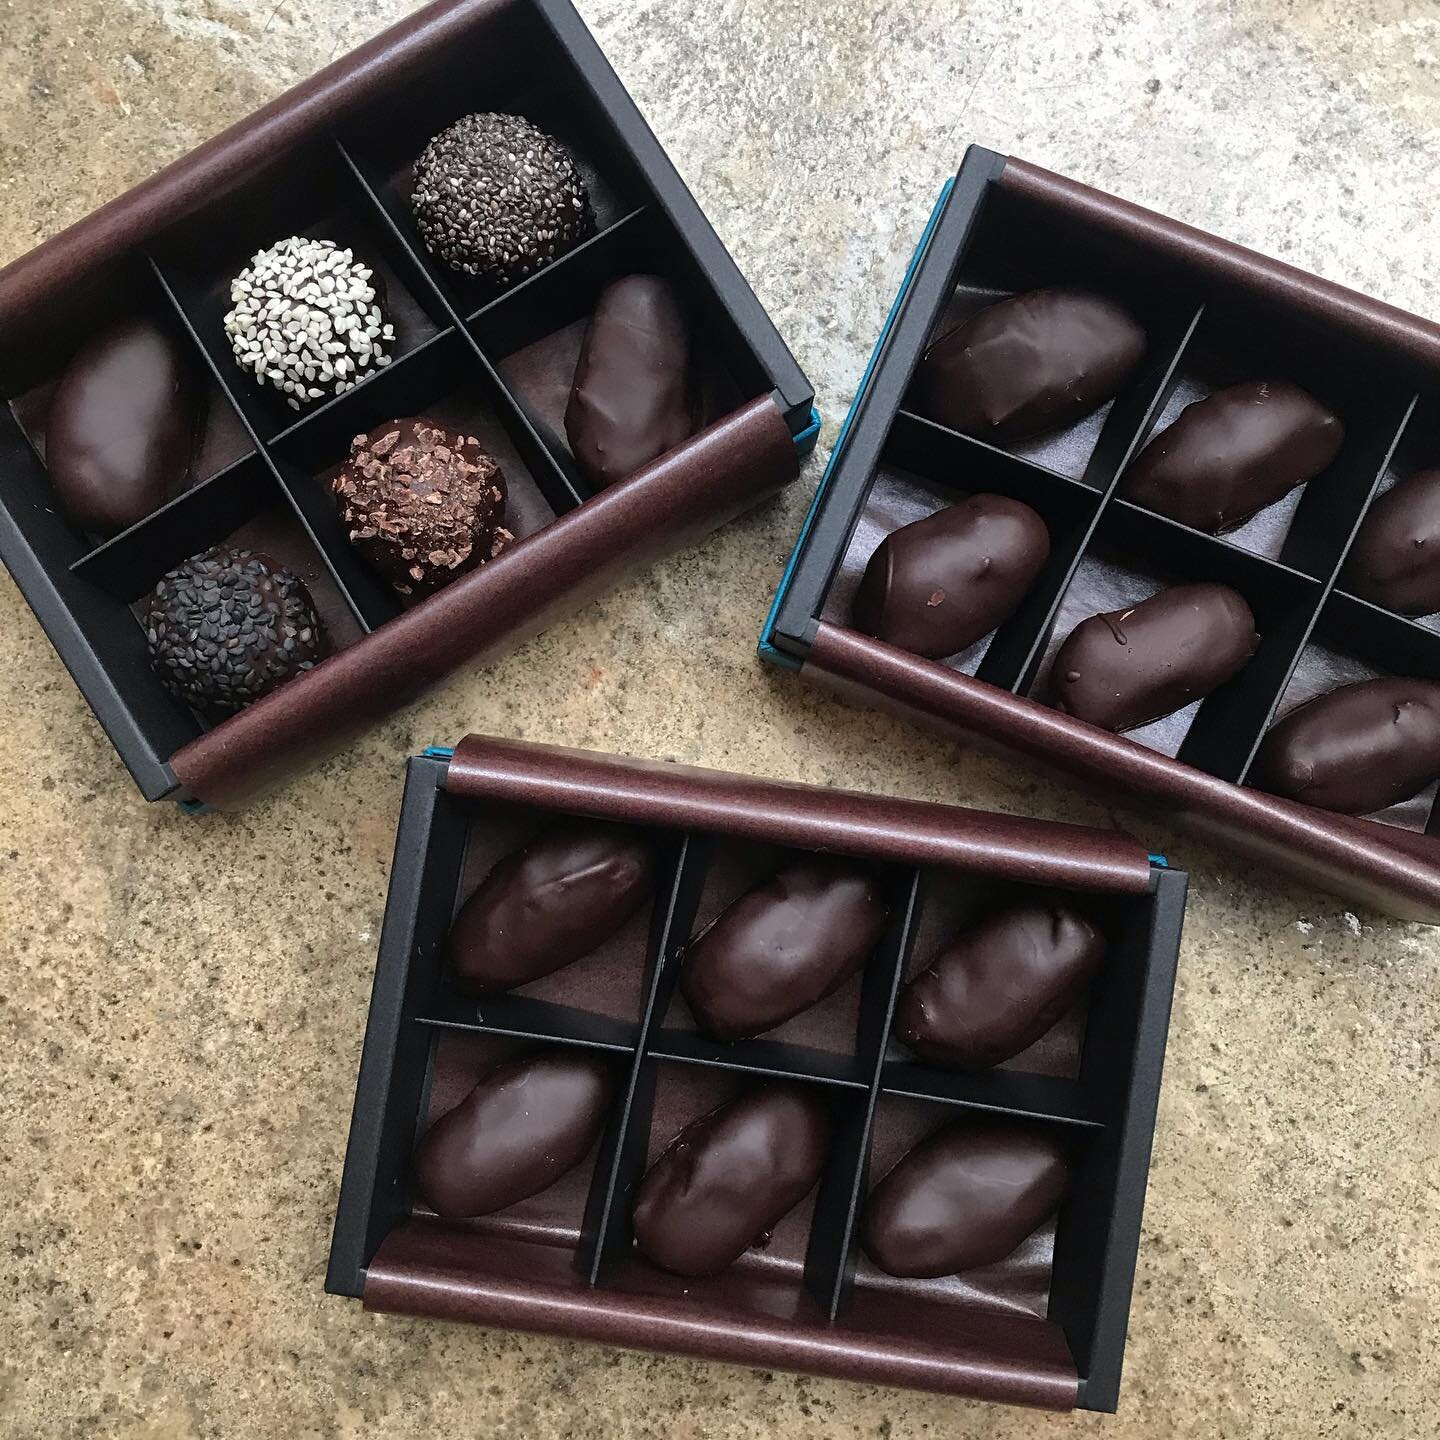 We have three boxes available to buy on our online shop:
- Balance Box
- Date Box with Almonds
- Date Box with Hazelnuts

... and one more box coming soon so stay tuned!

#chocolatecoveredwellness

#vegan #glutenfree #dairyfree #refinedsugarfree #pla